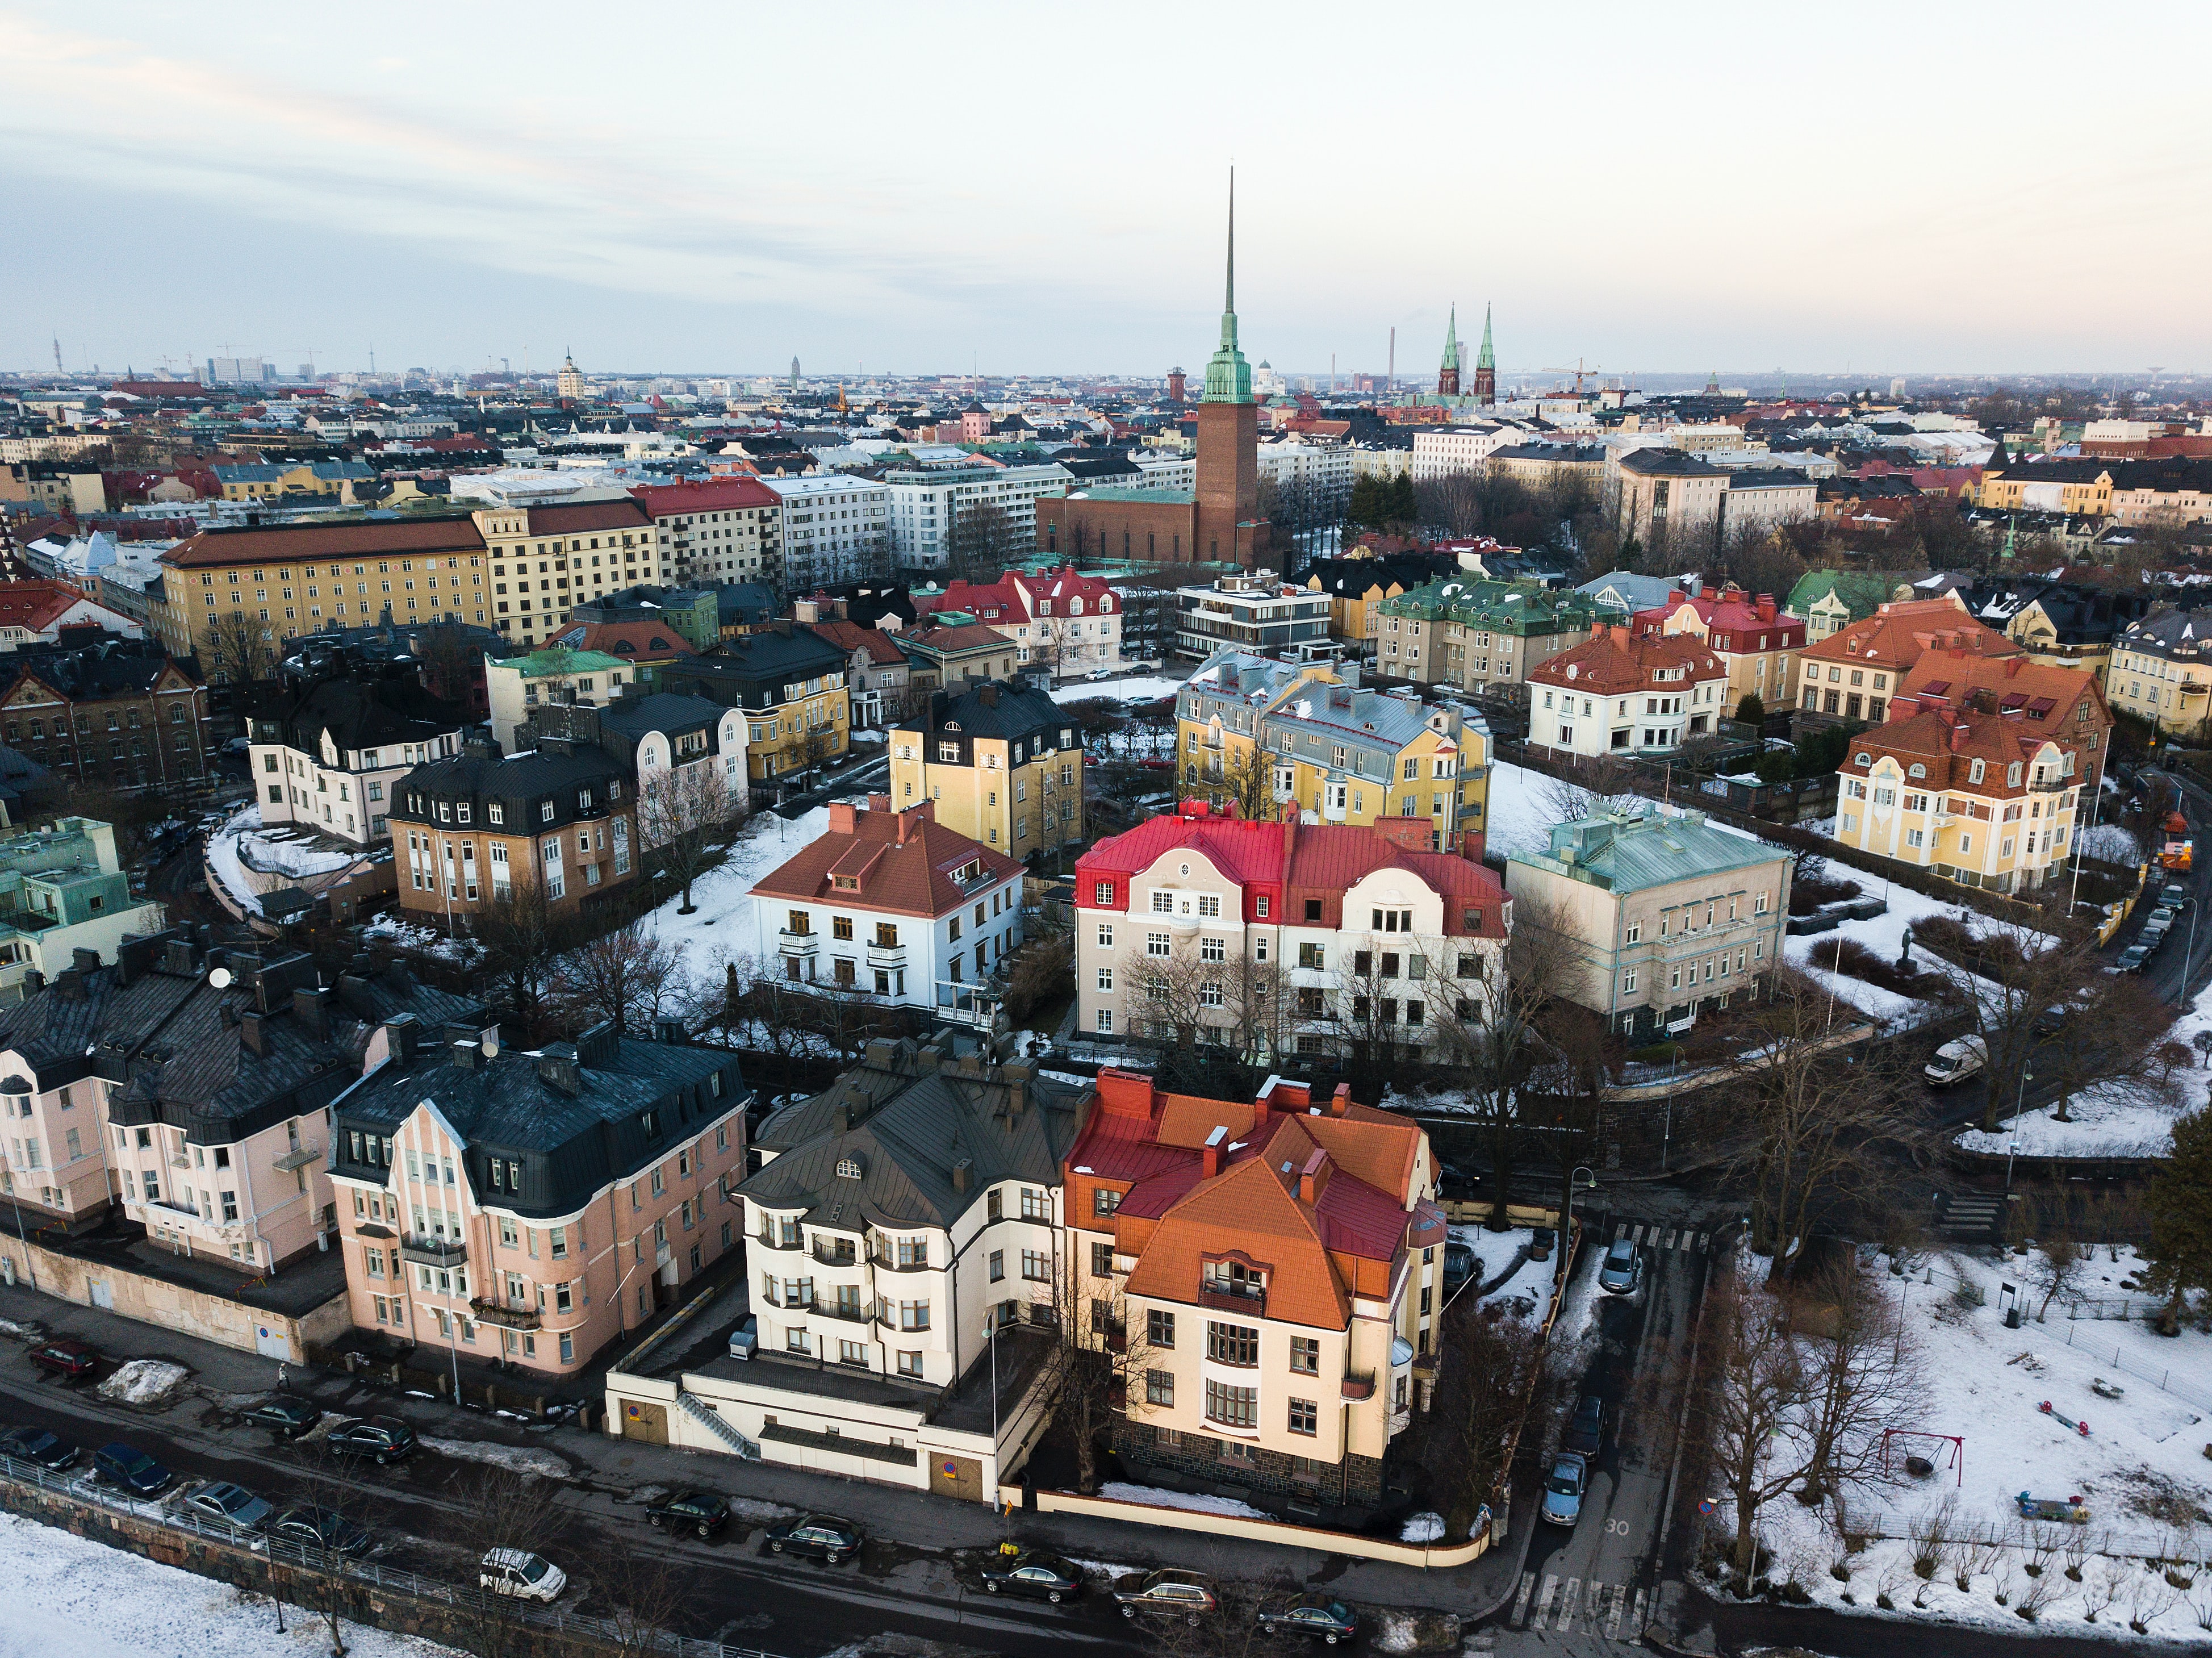 Colorful buildings from an aerial view in the Nordic city of Helsinki